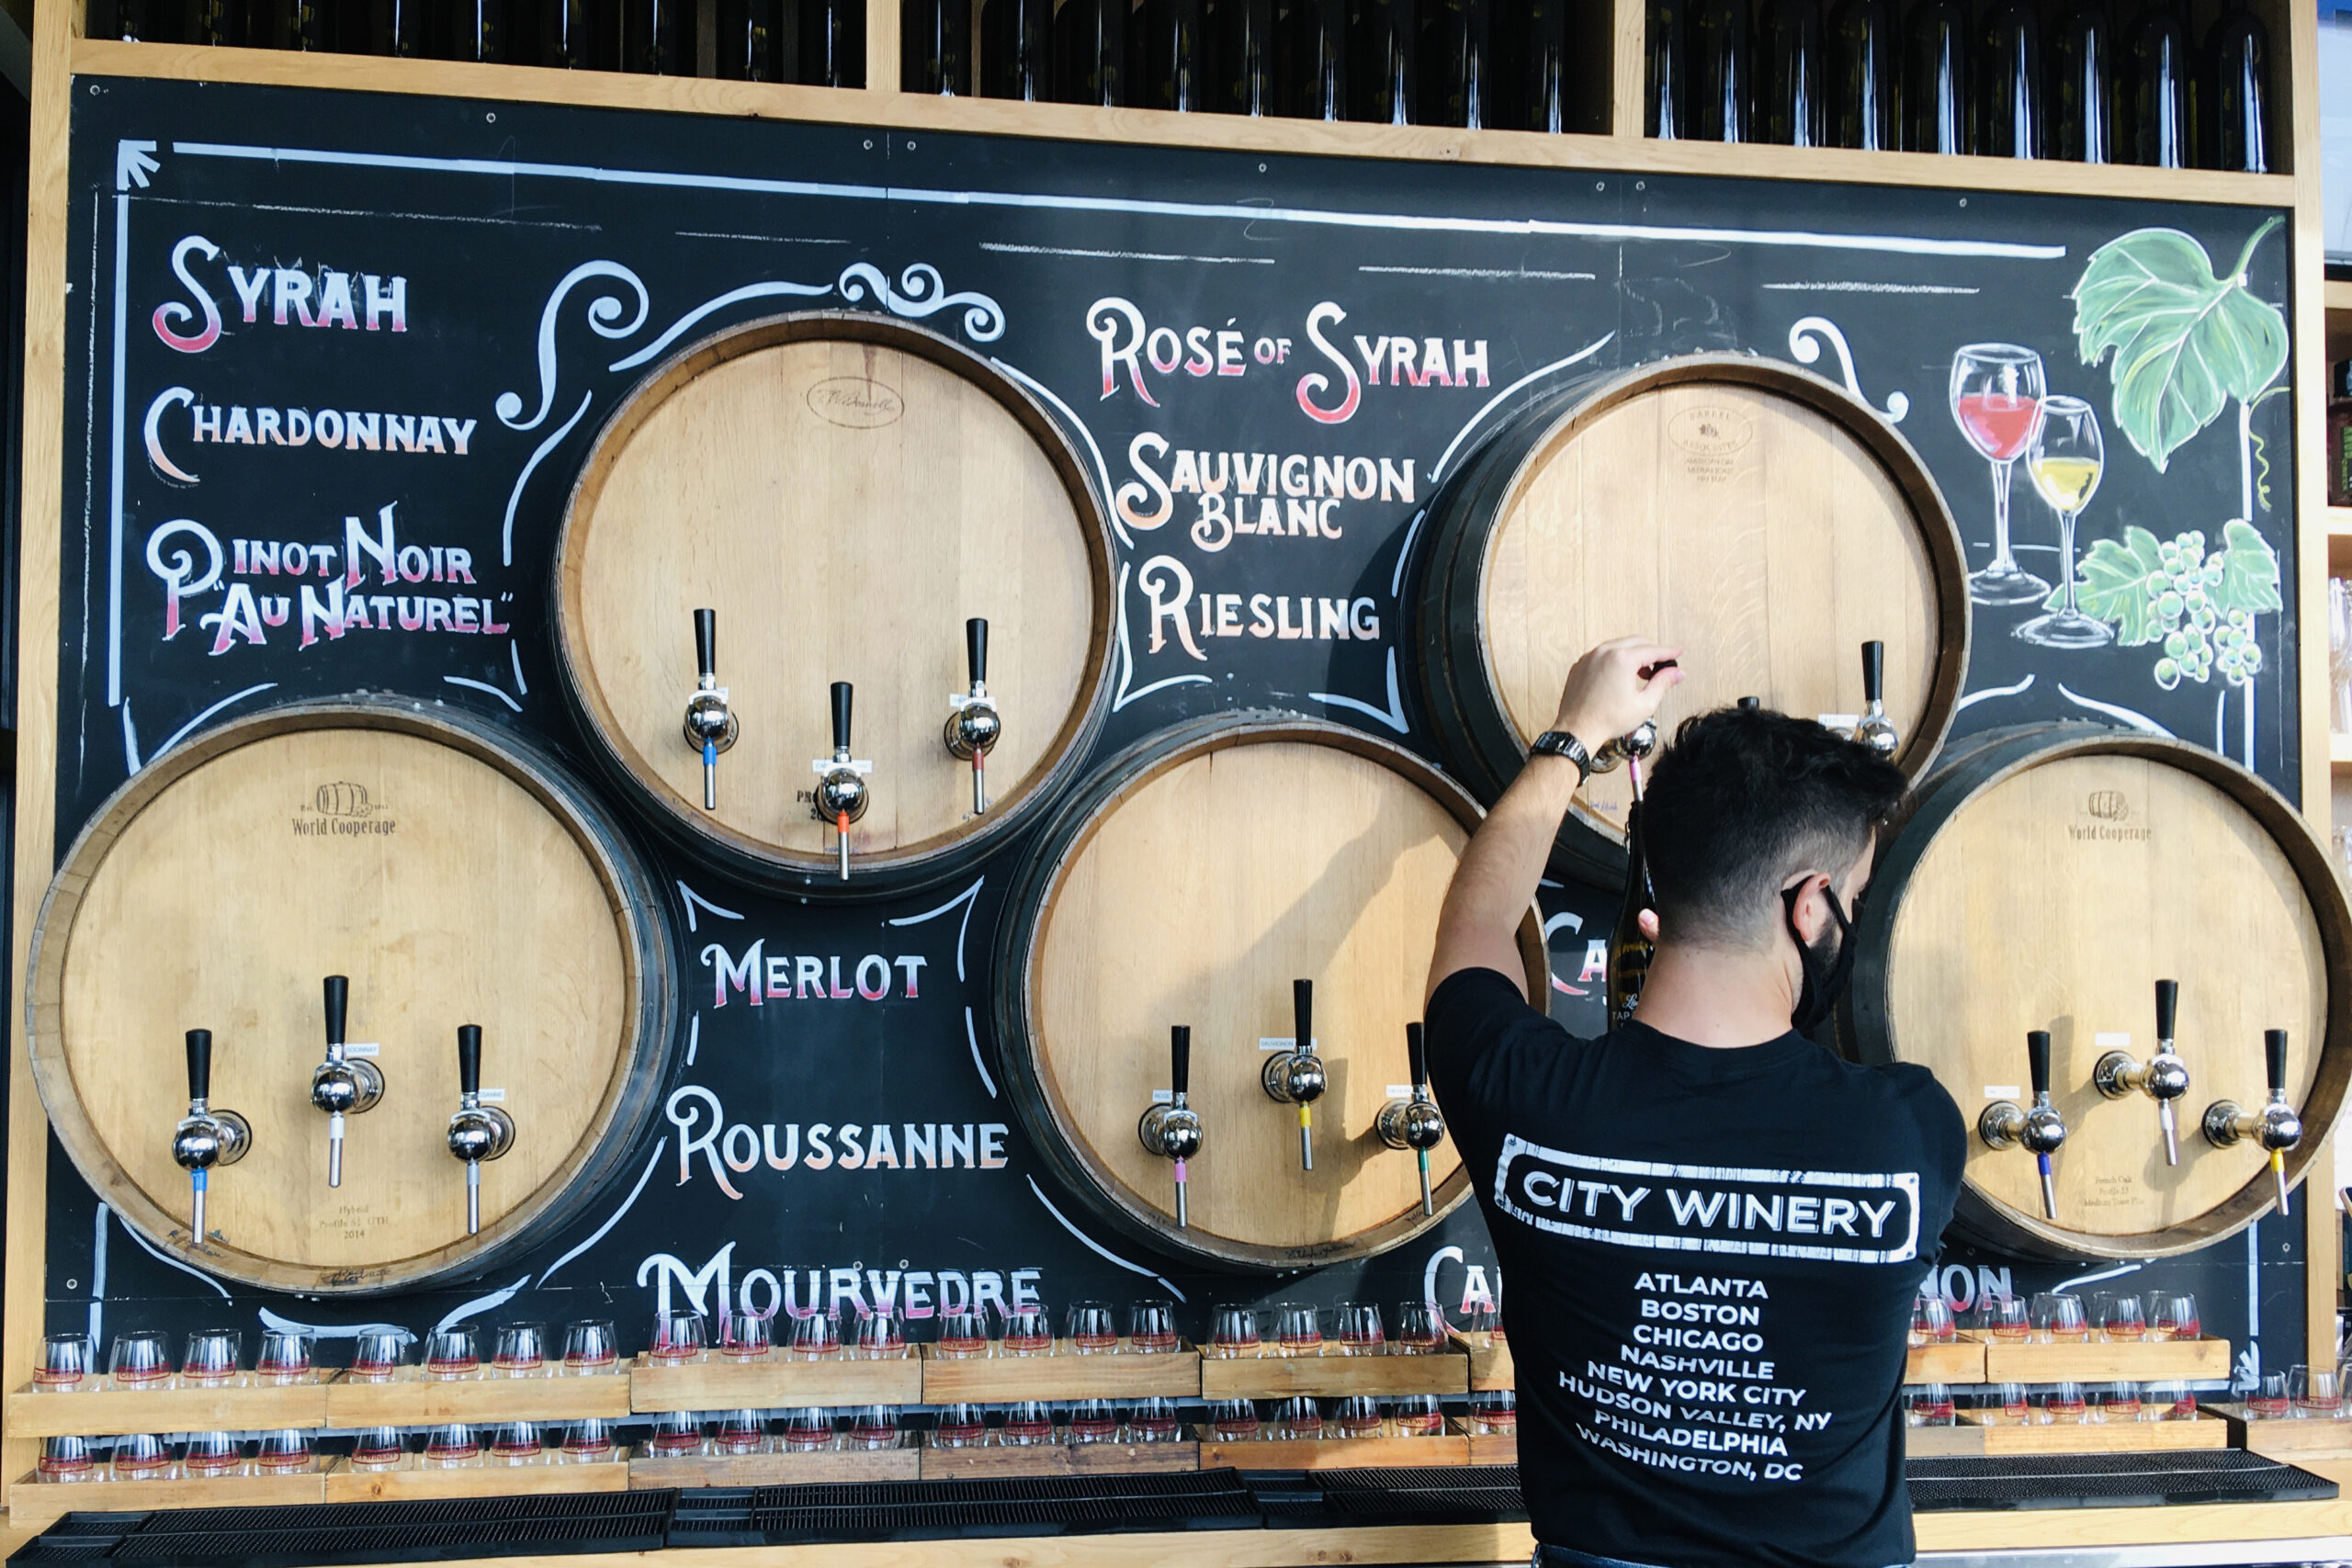 A City Winery staffer pours a glass of wine from a tap in a barrel embedded in the wall